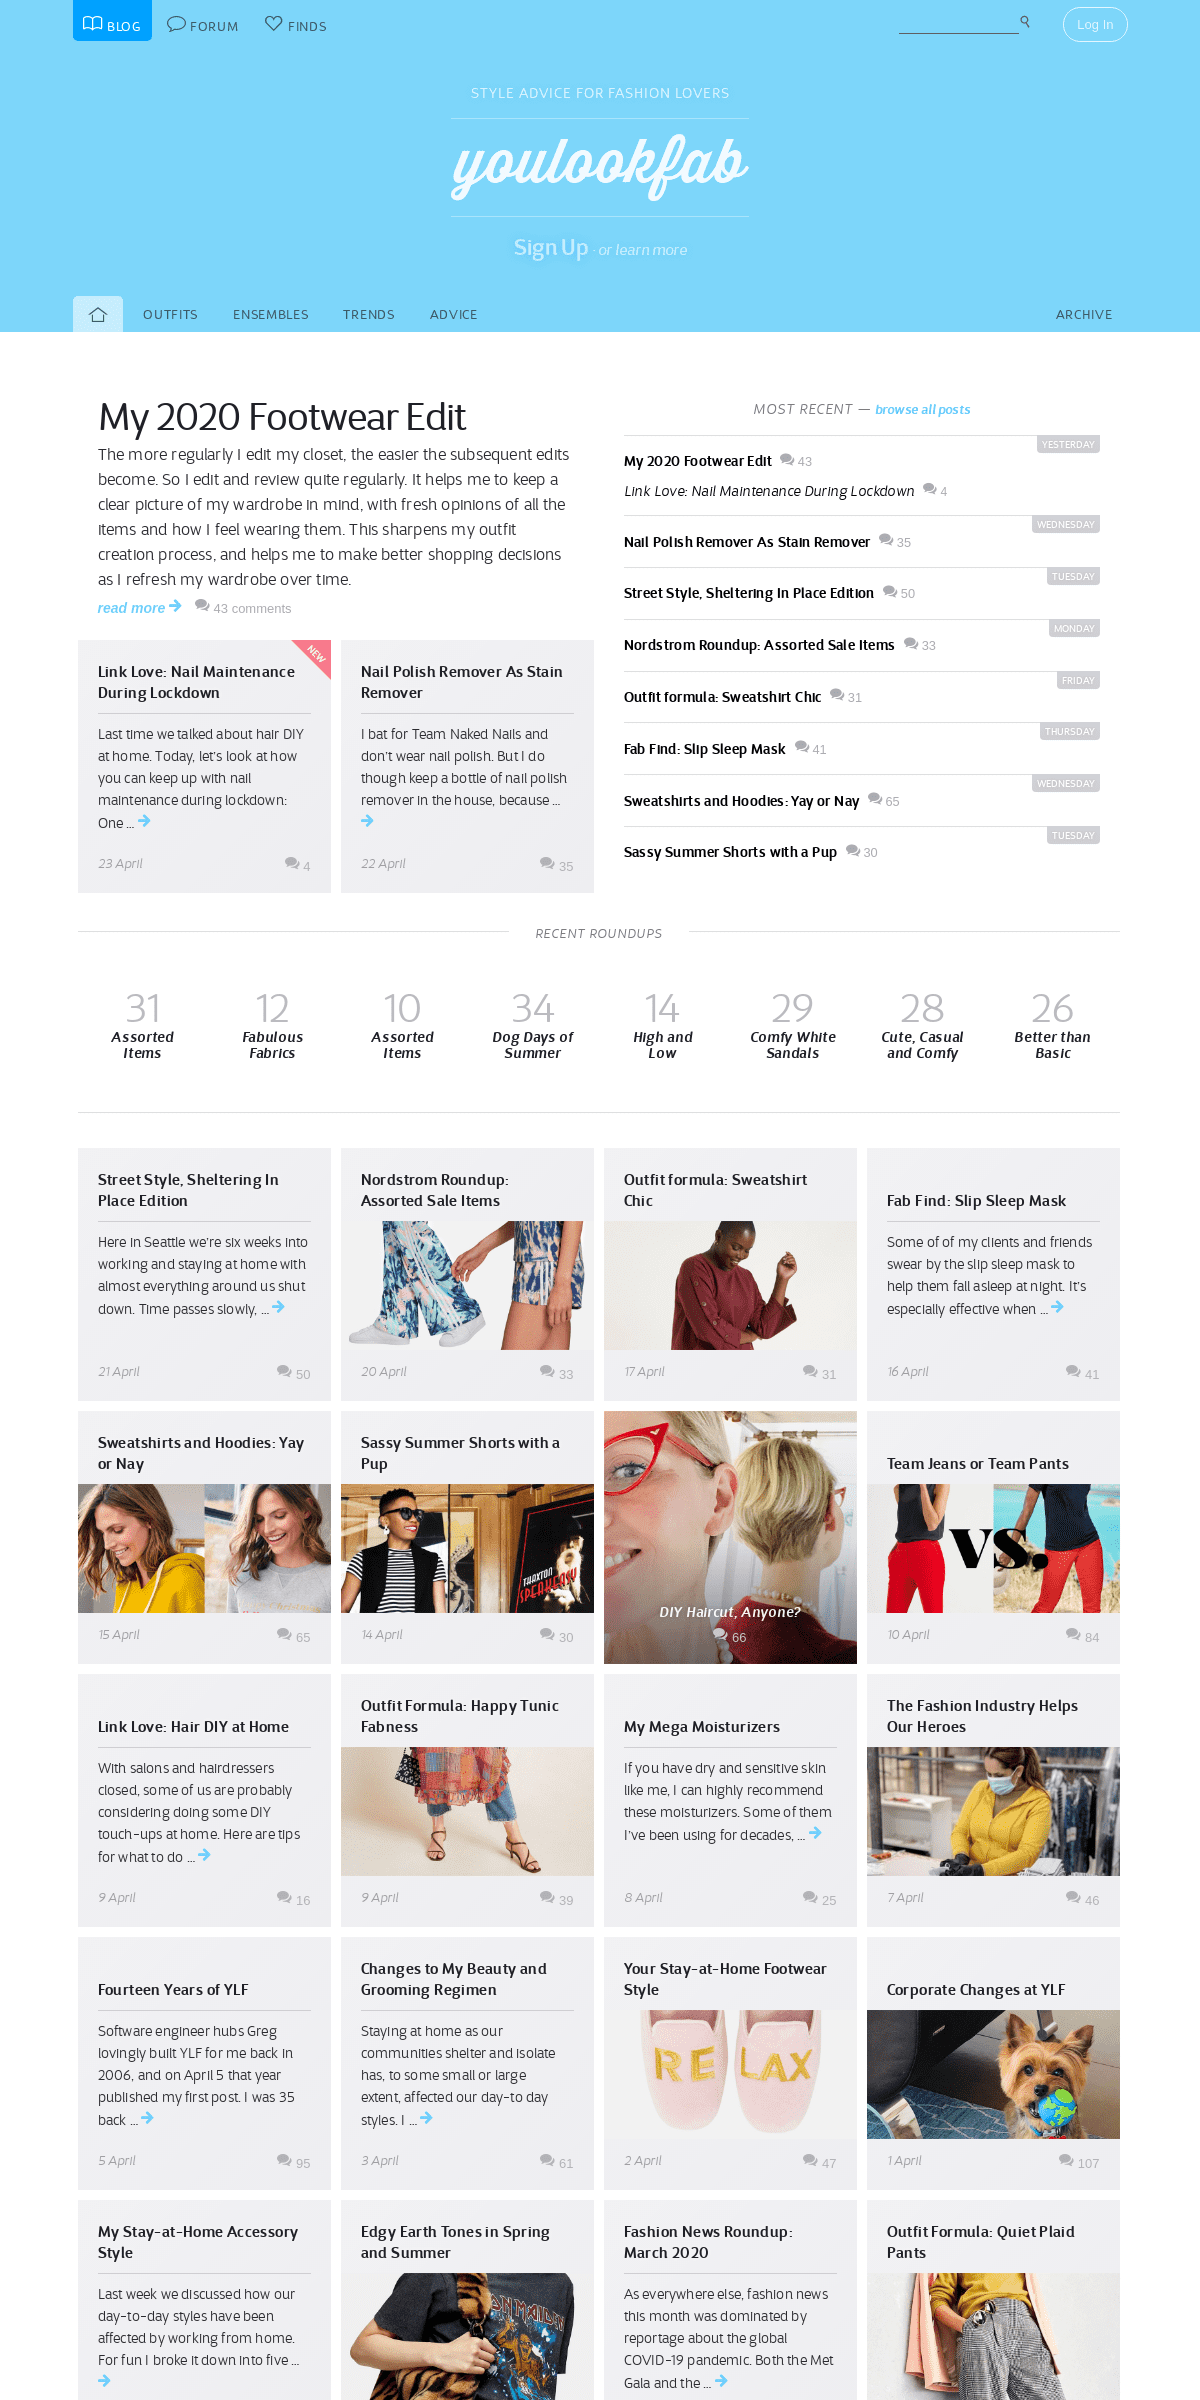 A complete backup of youlookfab.com